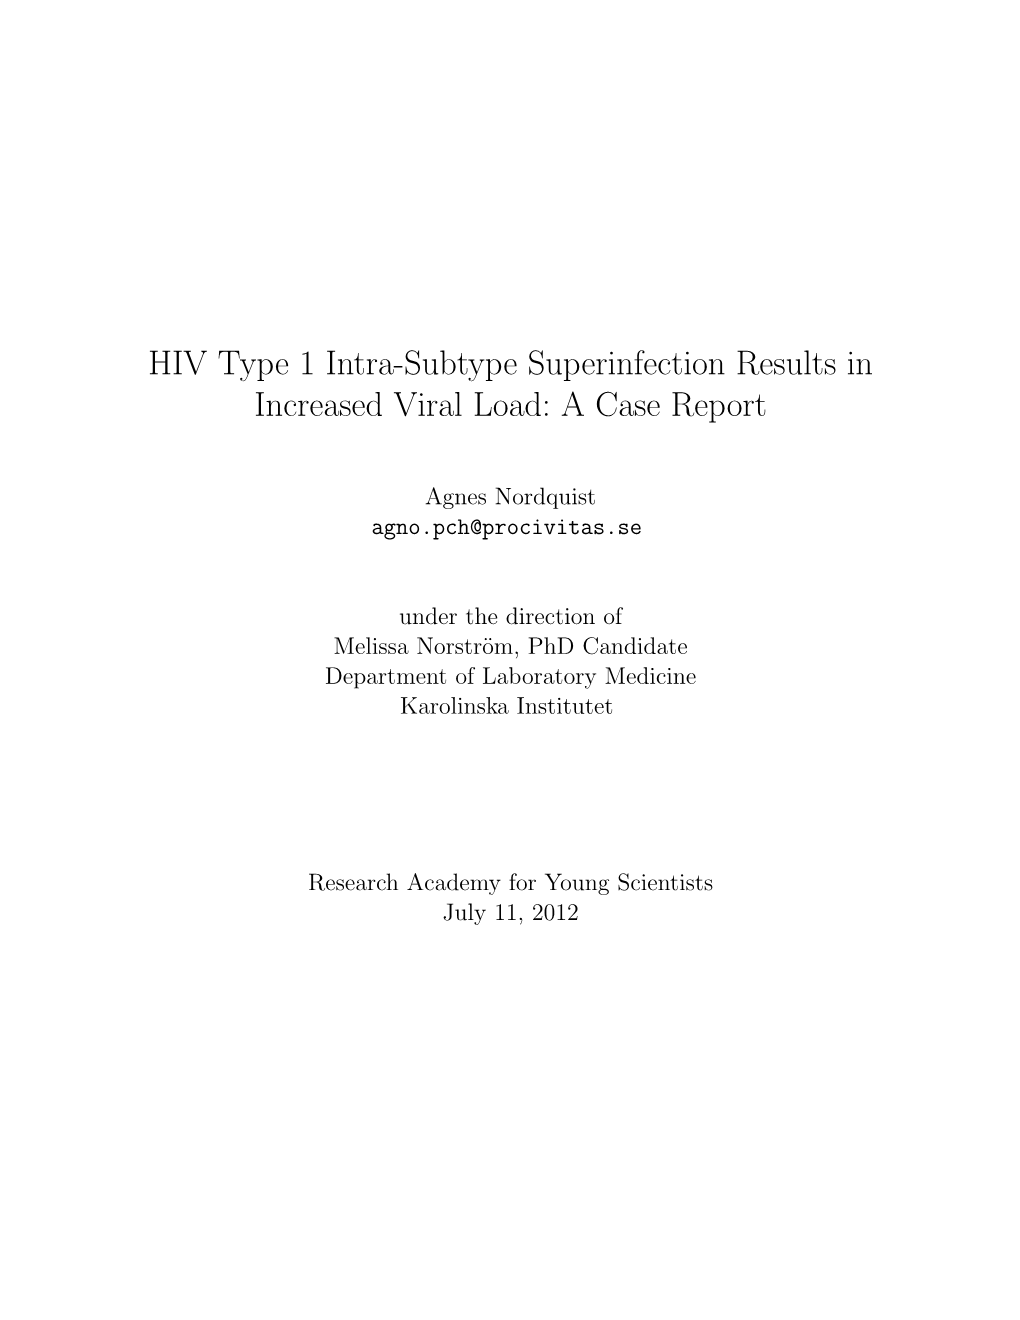 HIV Type 1 Intra-Subtype Superinfection Results in Increased Viral Load: a Case Report